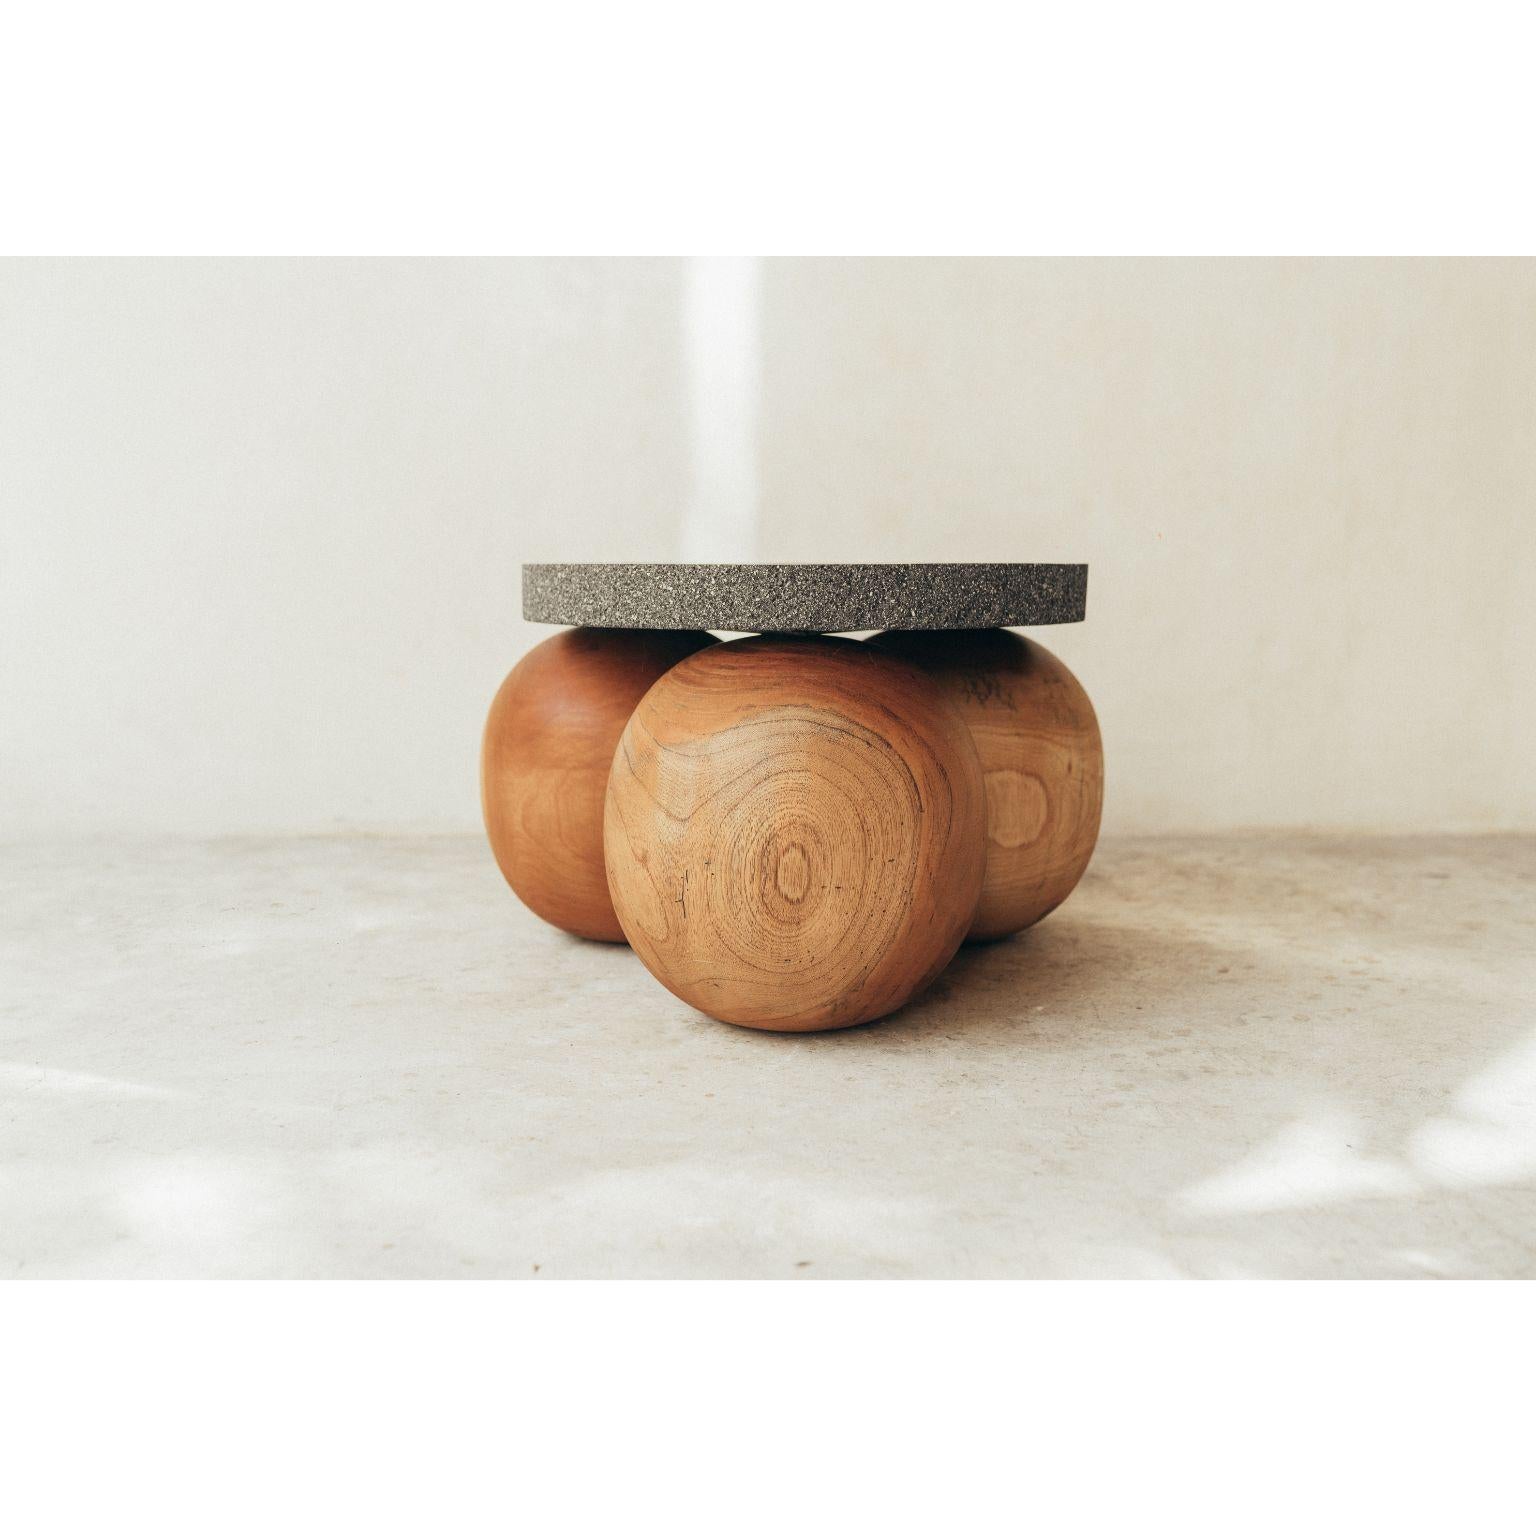 Natural wooden balls table with volcanic stone cover by Daniel Orozco
Dimensions: D20 x H50 cm
Materials: Wood, Volcanic Stone

Daniel Orozco Estudio
We are an inclusive interior design estudio, who love to work with fabrics and natural